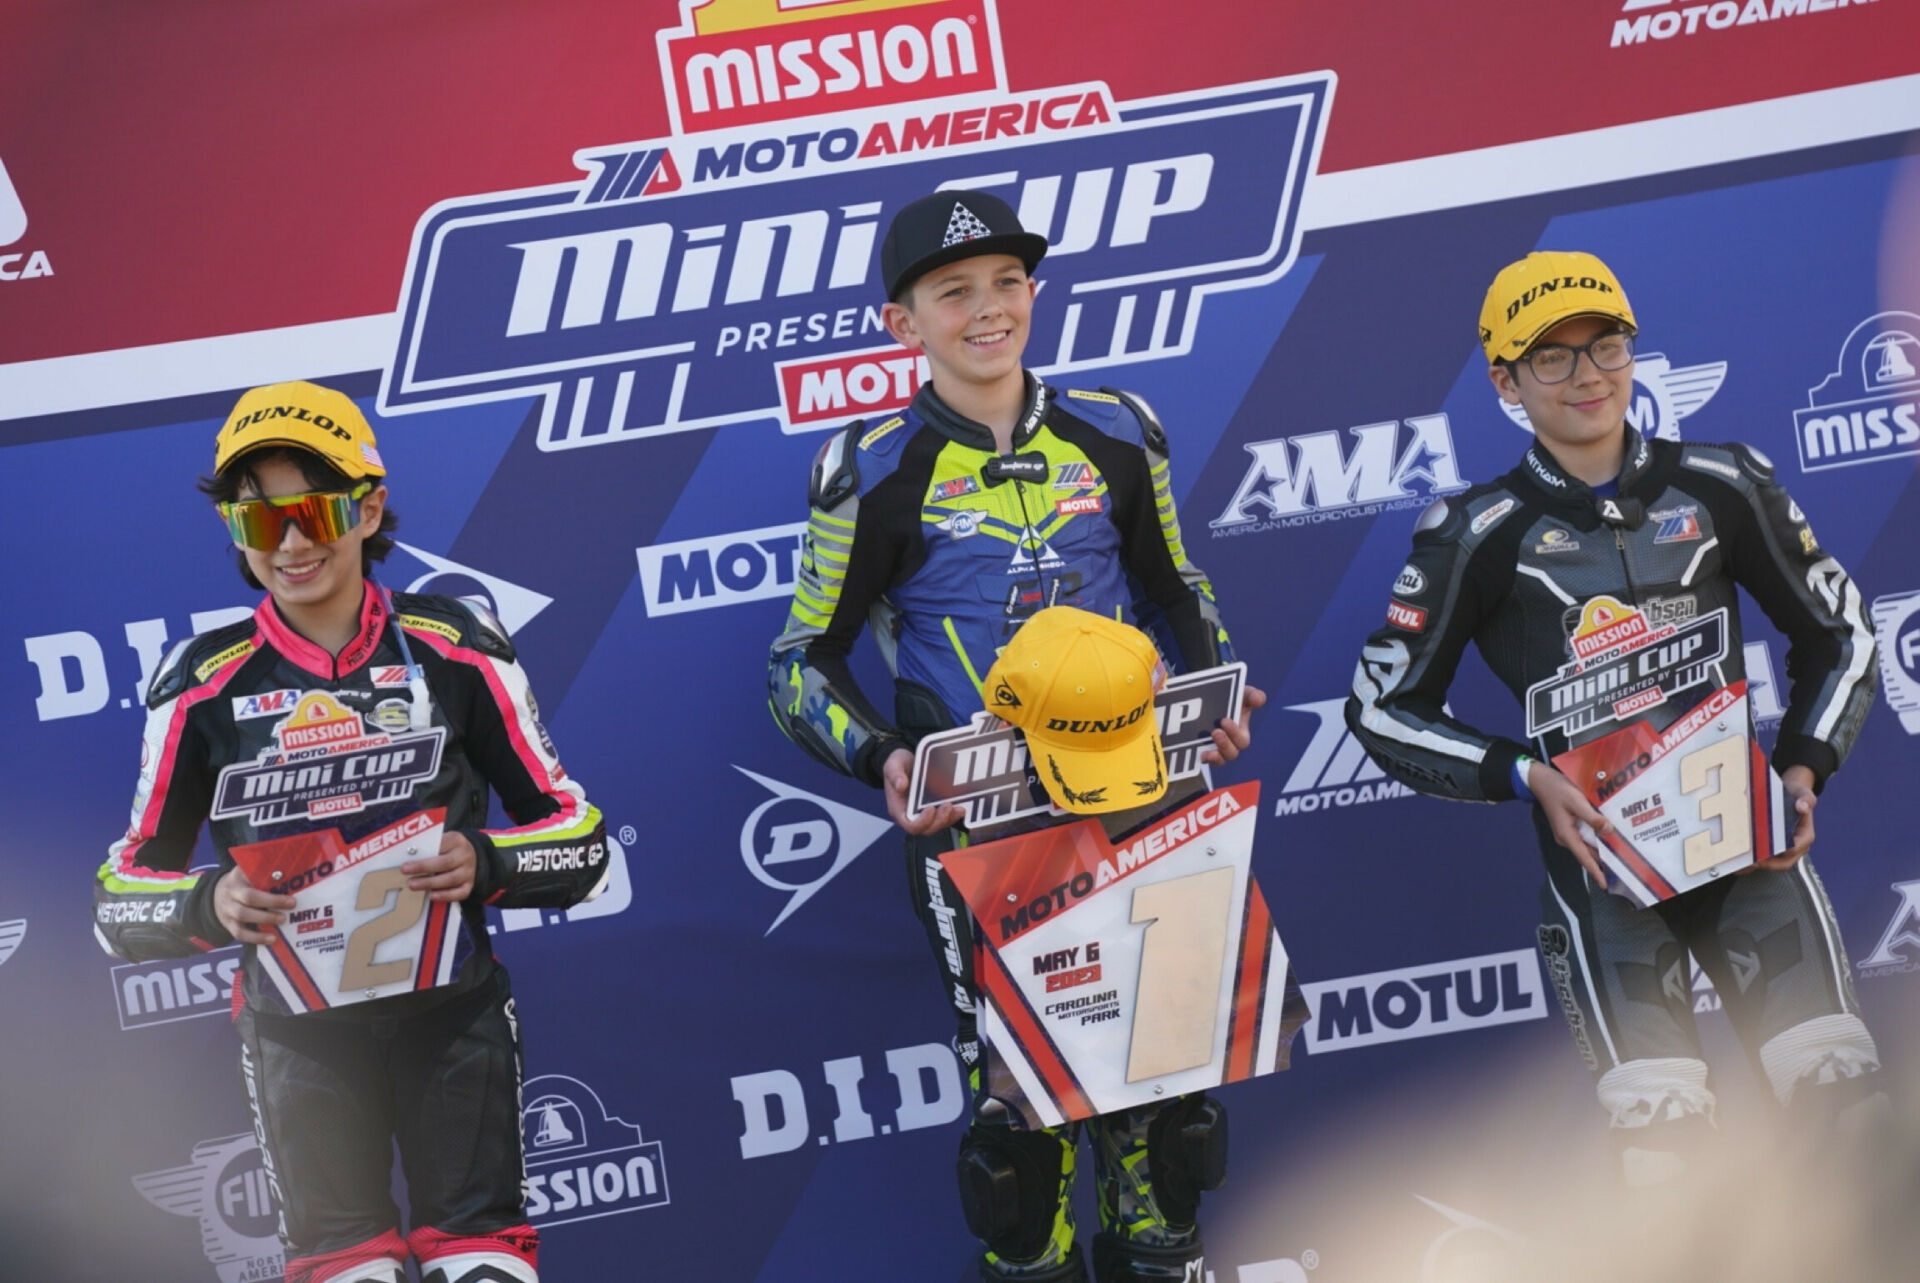 Mahdi Salem (left), Ryder Davis (center), and Nathan Bettencourt (right) celebrate their top-three finishes from the second Mission Mini Cup By Motul Ohvale 190 race at Carolina Motorsports Park. Photo courtesy MotoAmerica.